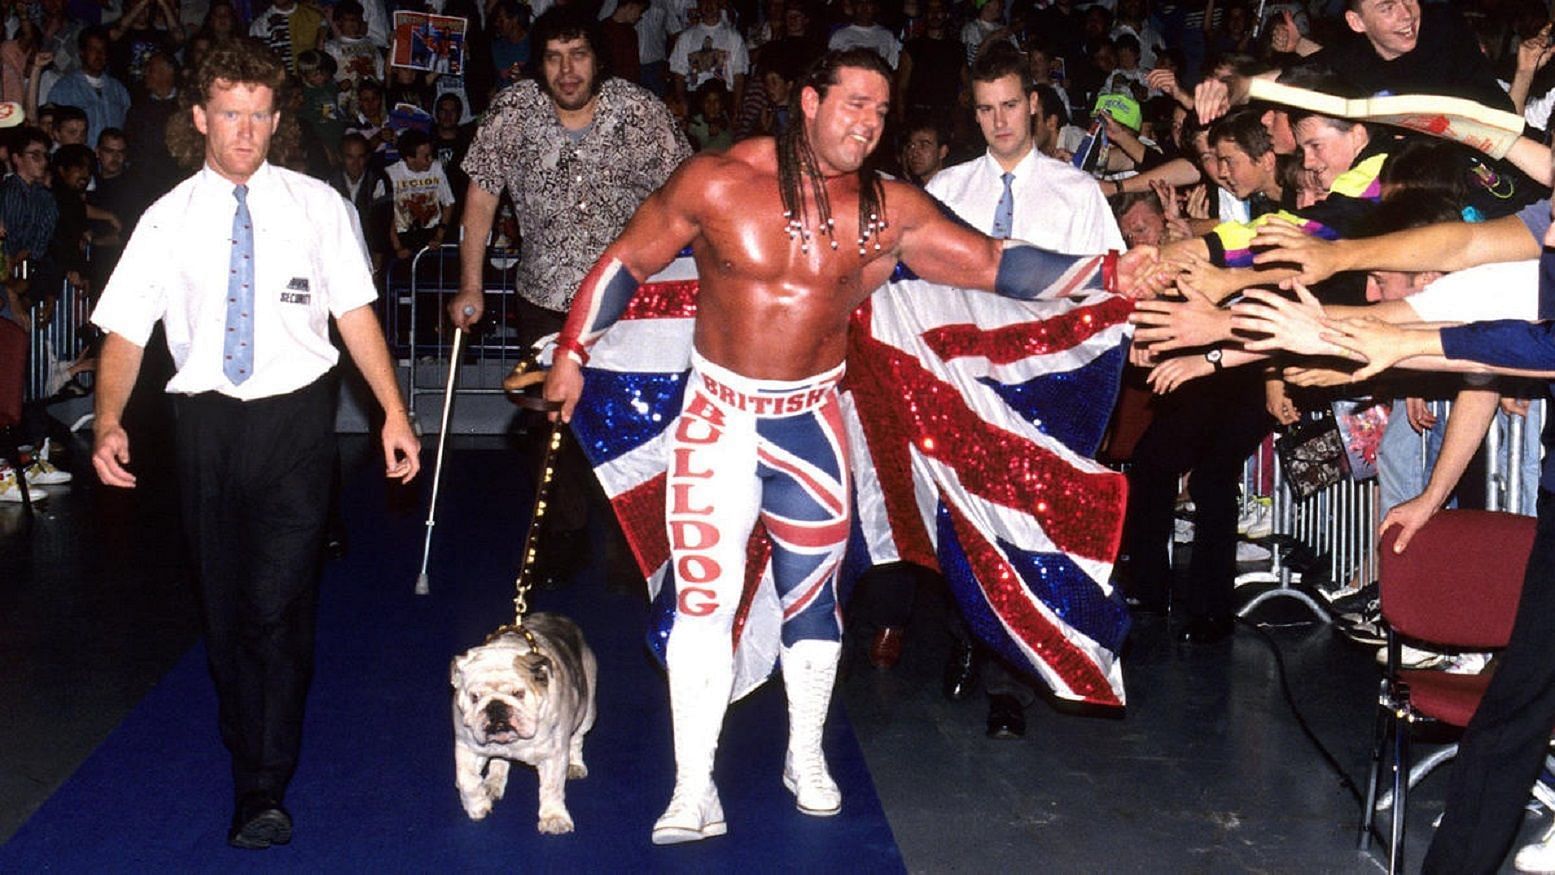 The British Bulldog during his prime in WWE (then WWF)